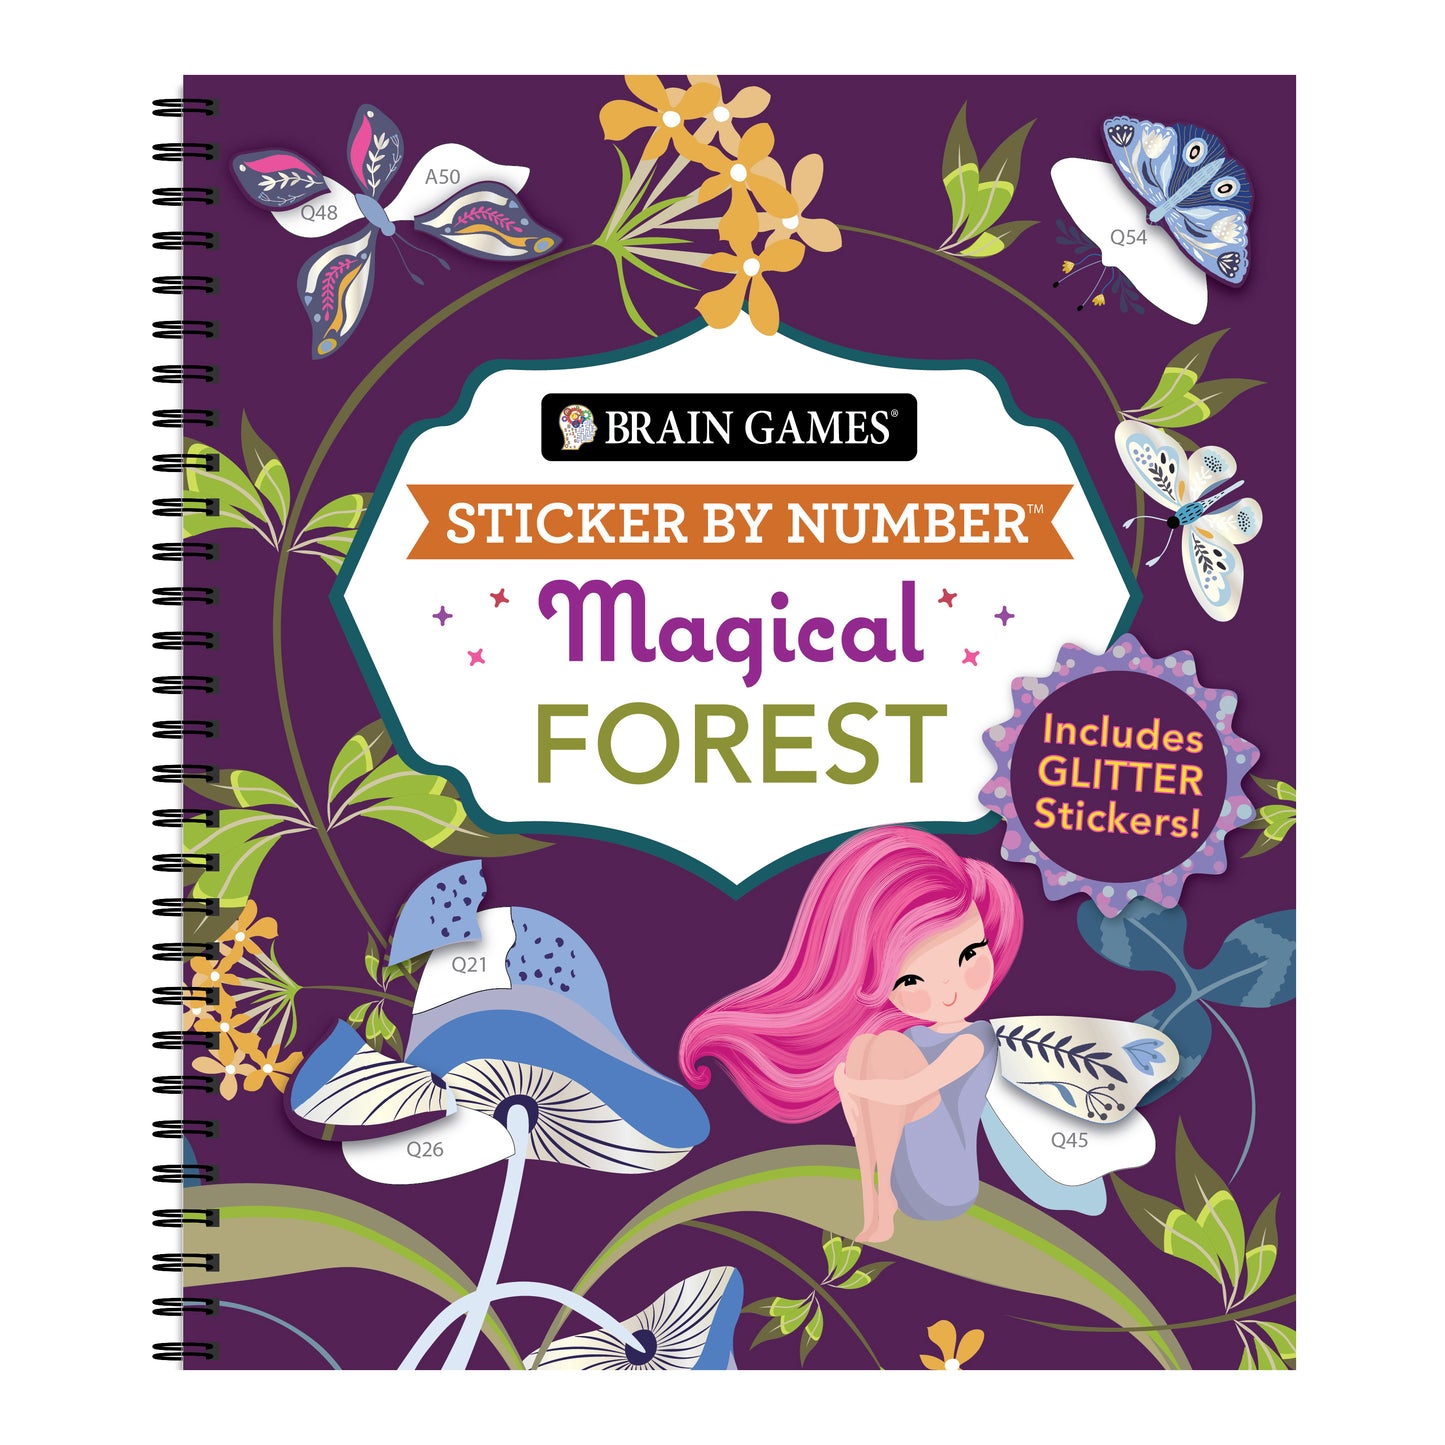 Brain Games - Sticker by Number: Magical Forest